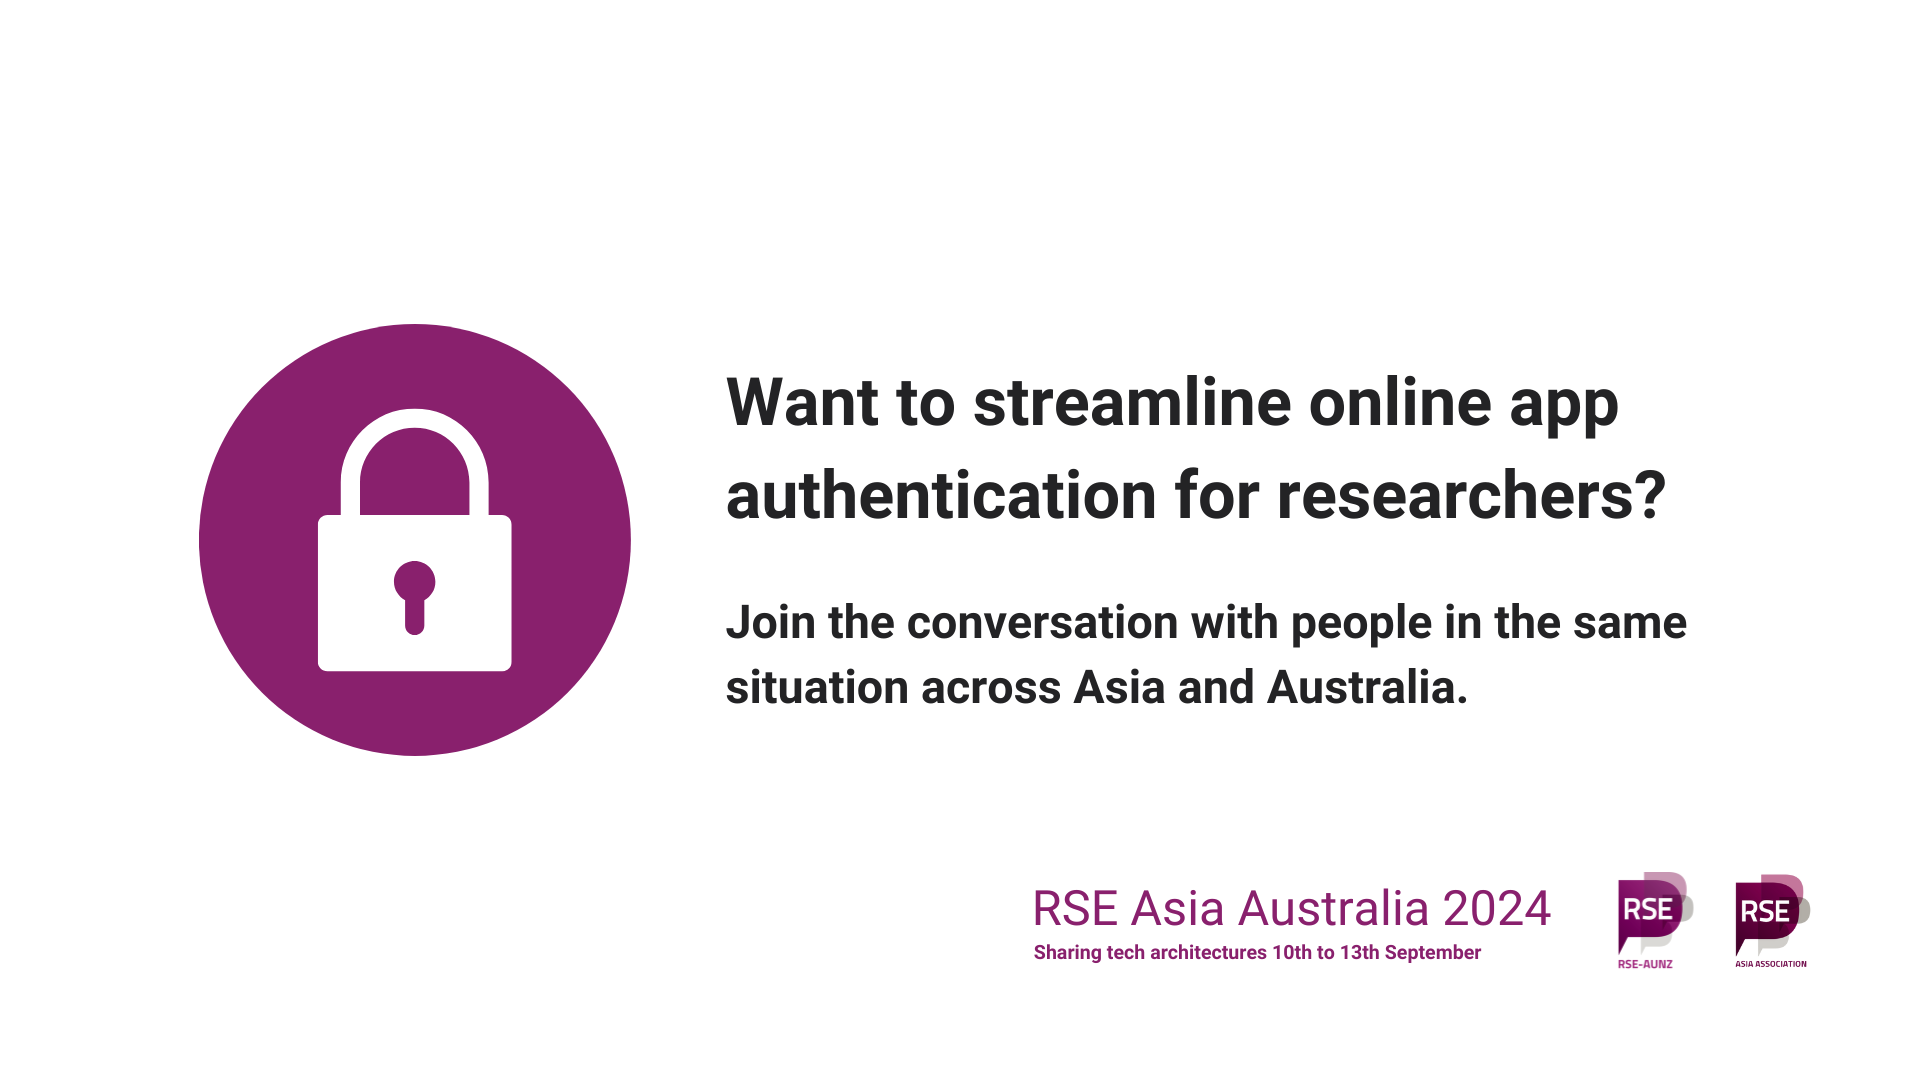 A security lock in a purple circle. Want to streamline online app authentication for researchers? Join the conversation with people in the same situation across Asia and Australia. RSE Asia Australia 2024. Sharing tech architectures. 10th to 13th September. Logos of RSE AUNZ and RSE Asia.